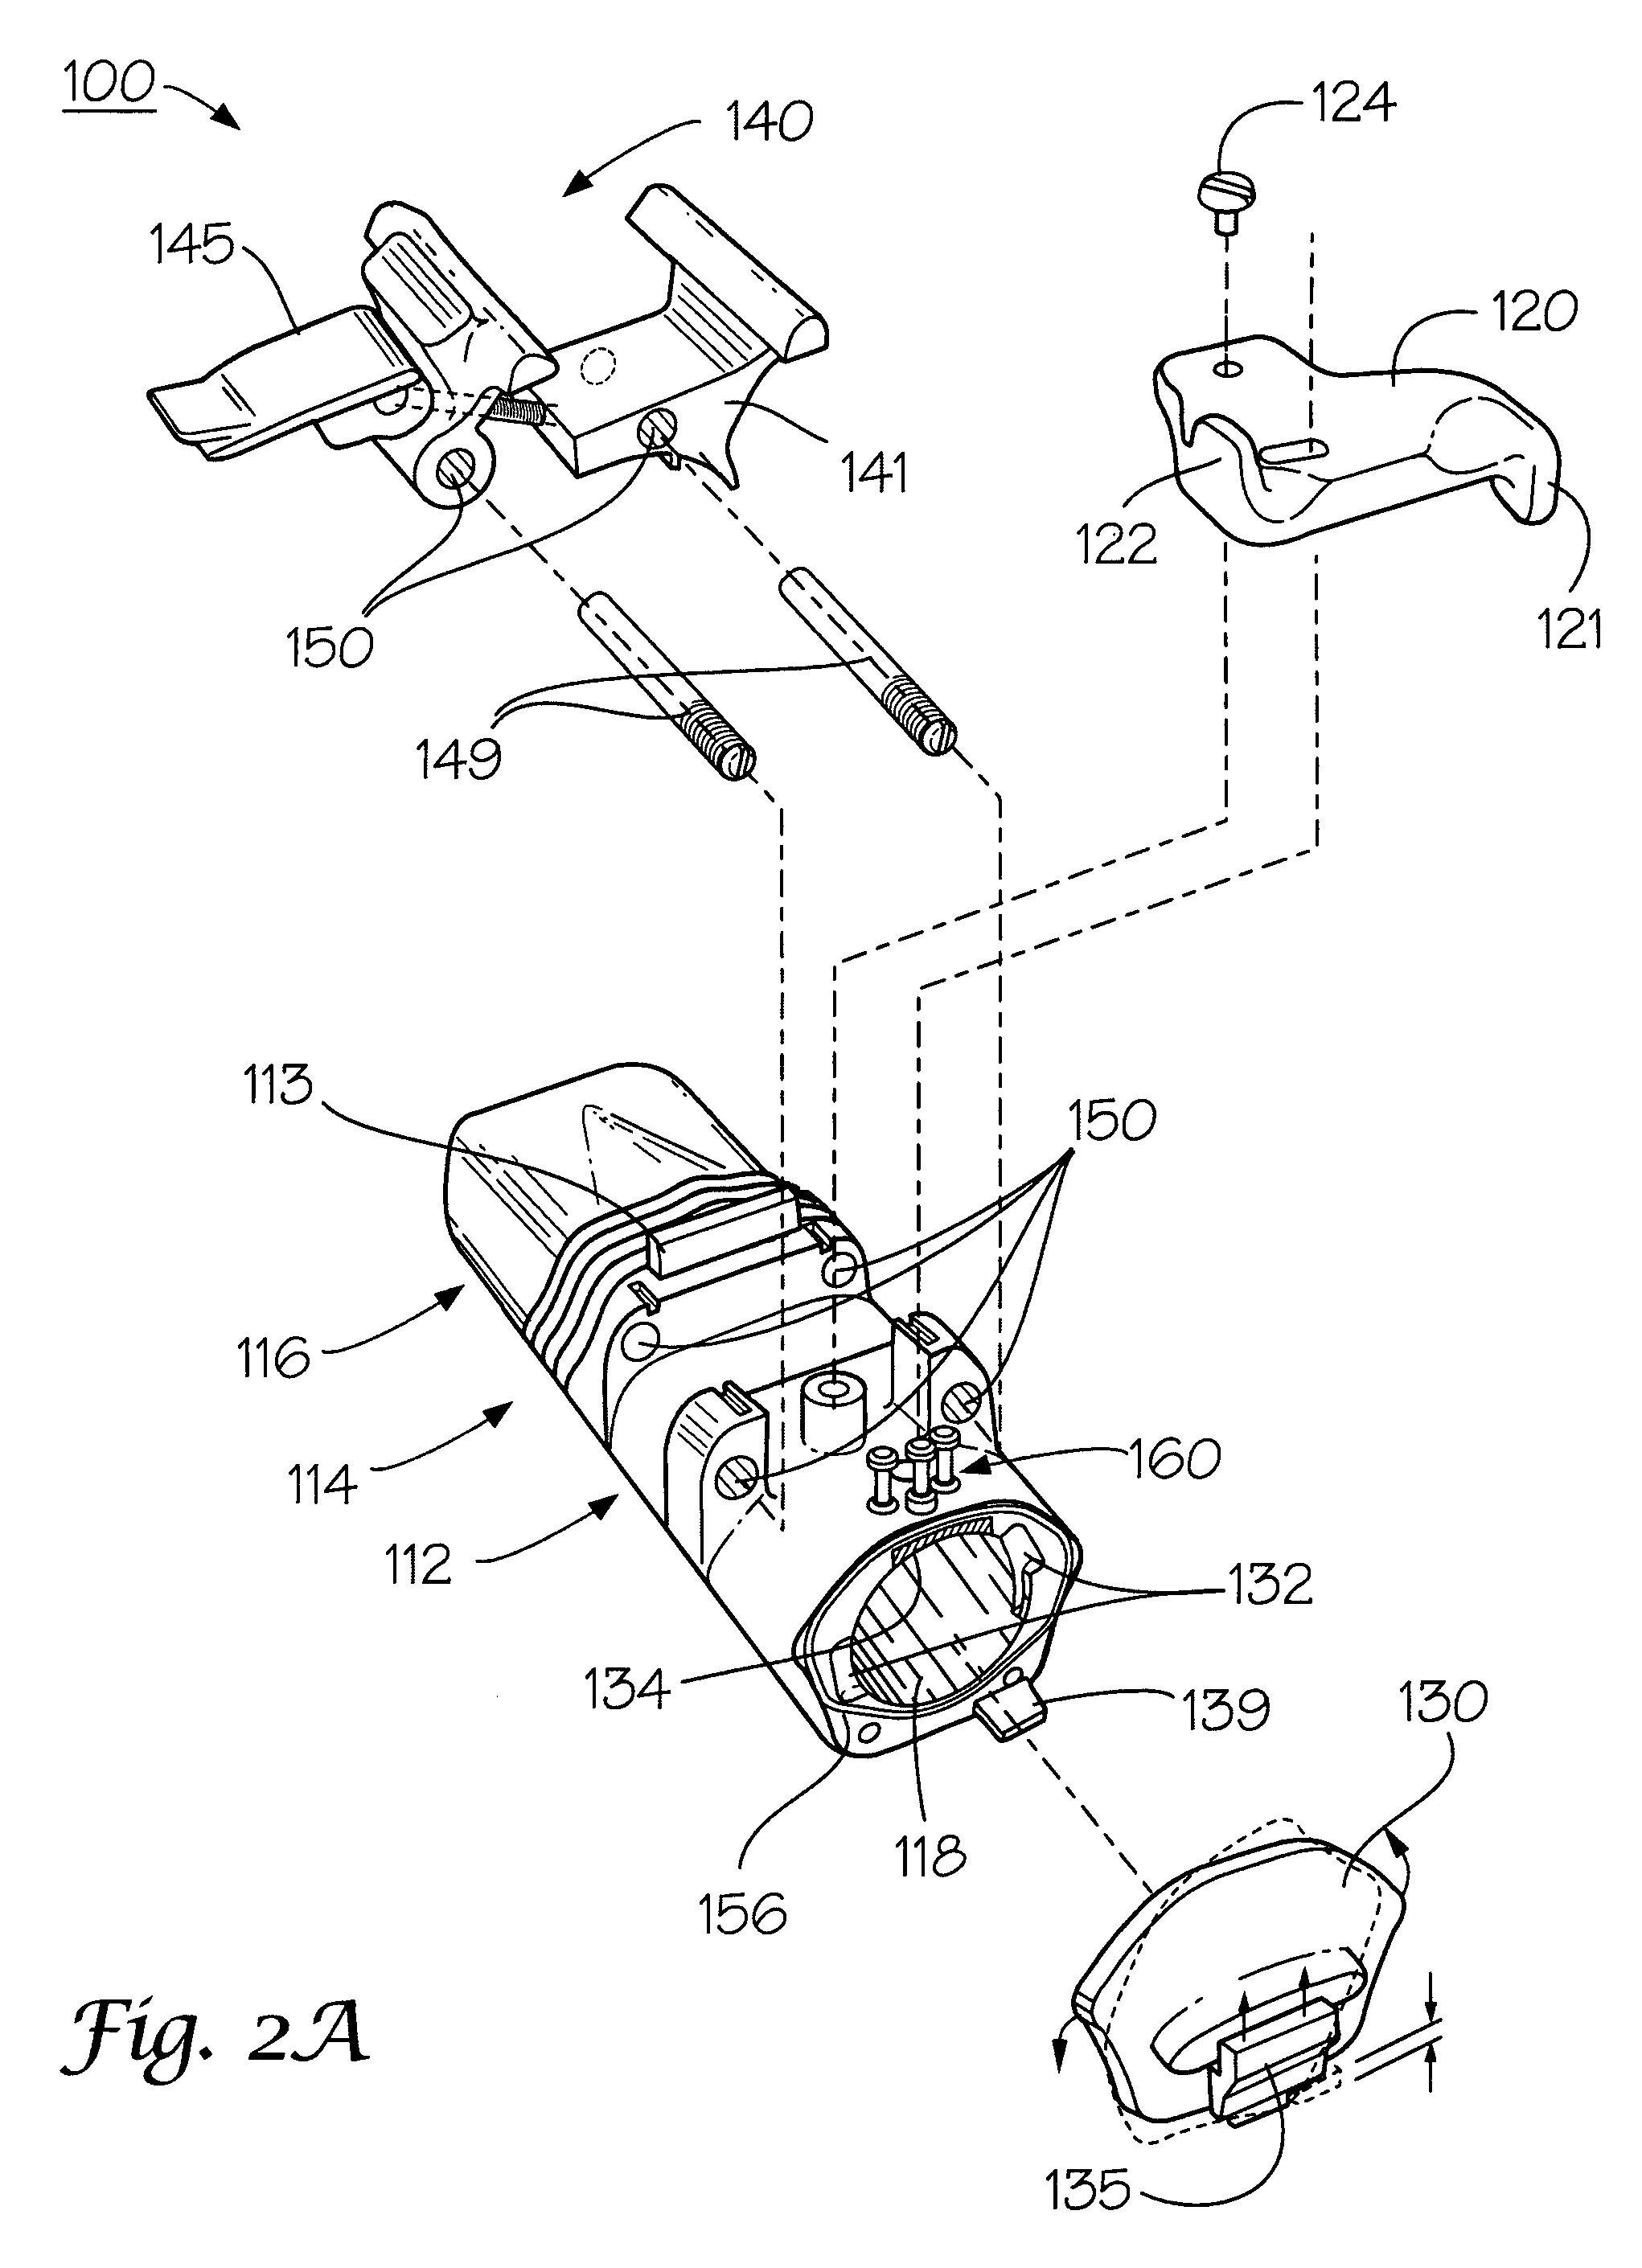 Offset accessory mount